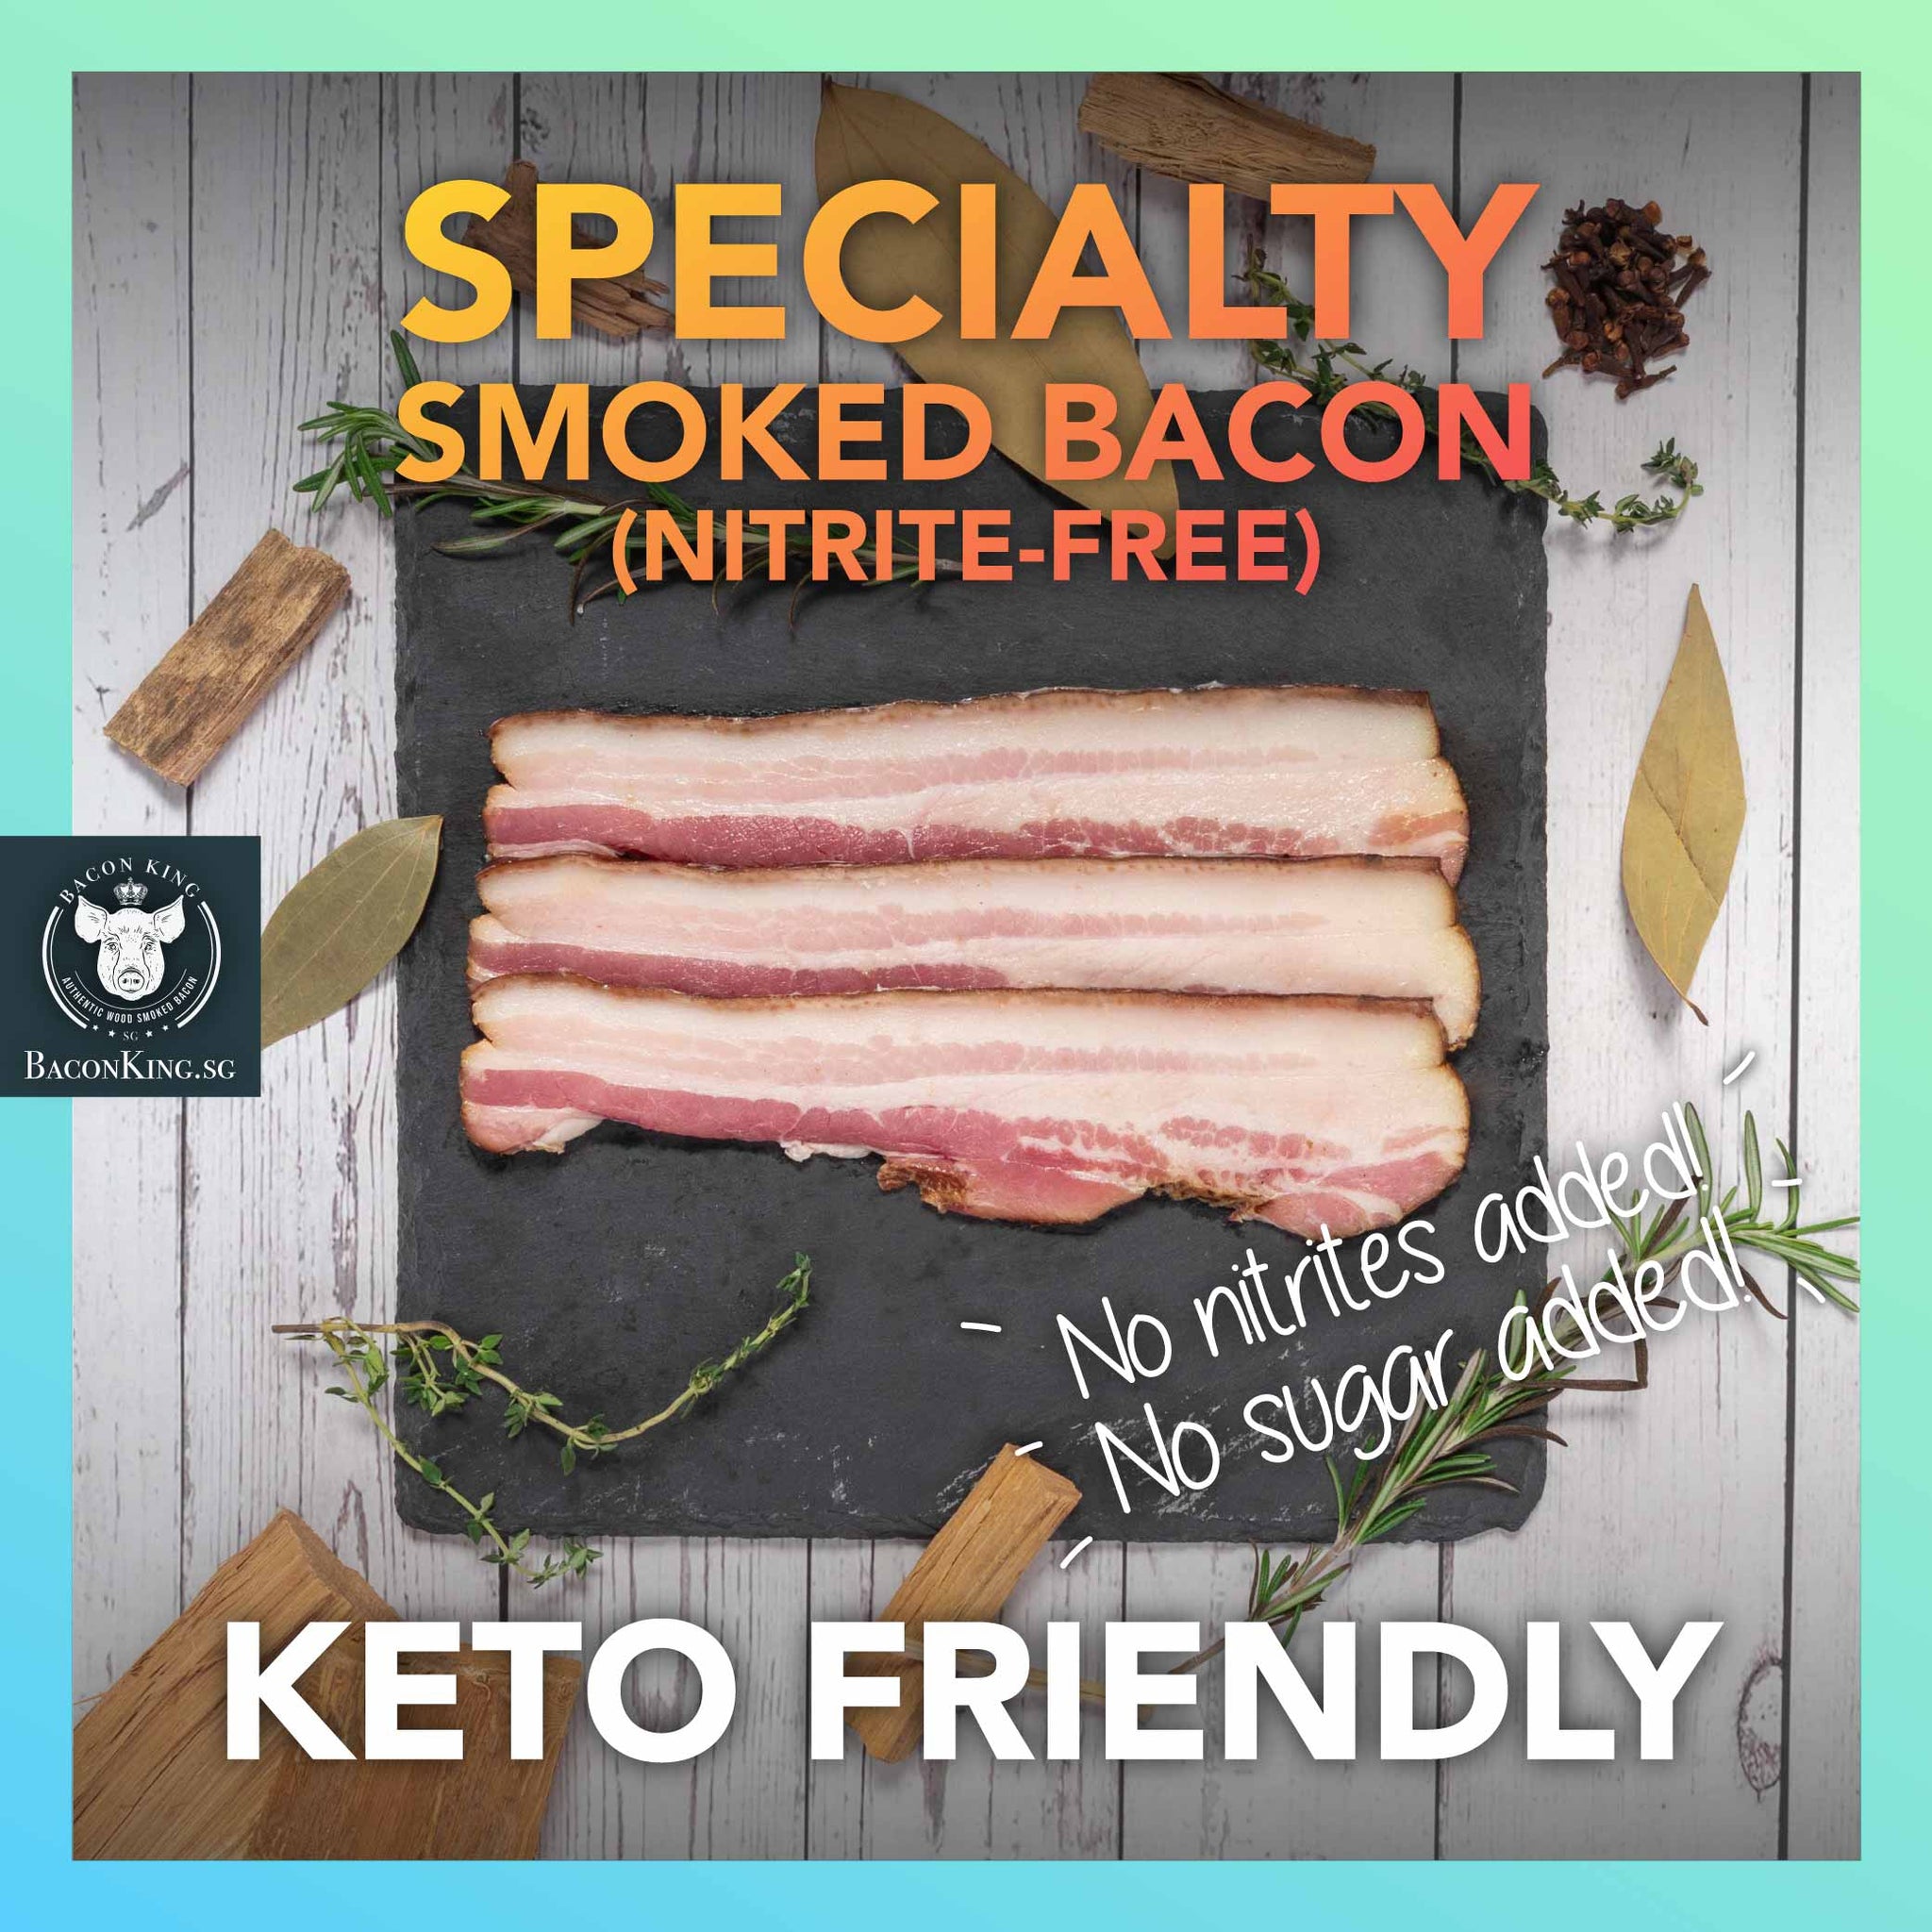 Slices of Keto-friendly Specialty Smoked Bacon on Stone Plate with Bay Leaves, Rosemary, Thyme, Cloves, Applewood chips decorating the side, against a marble background